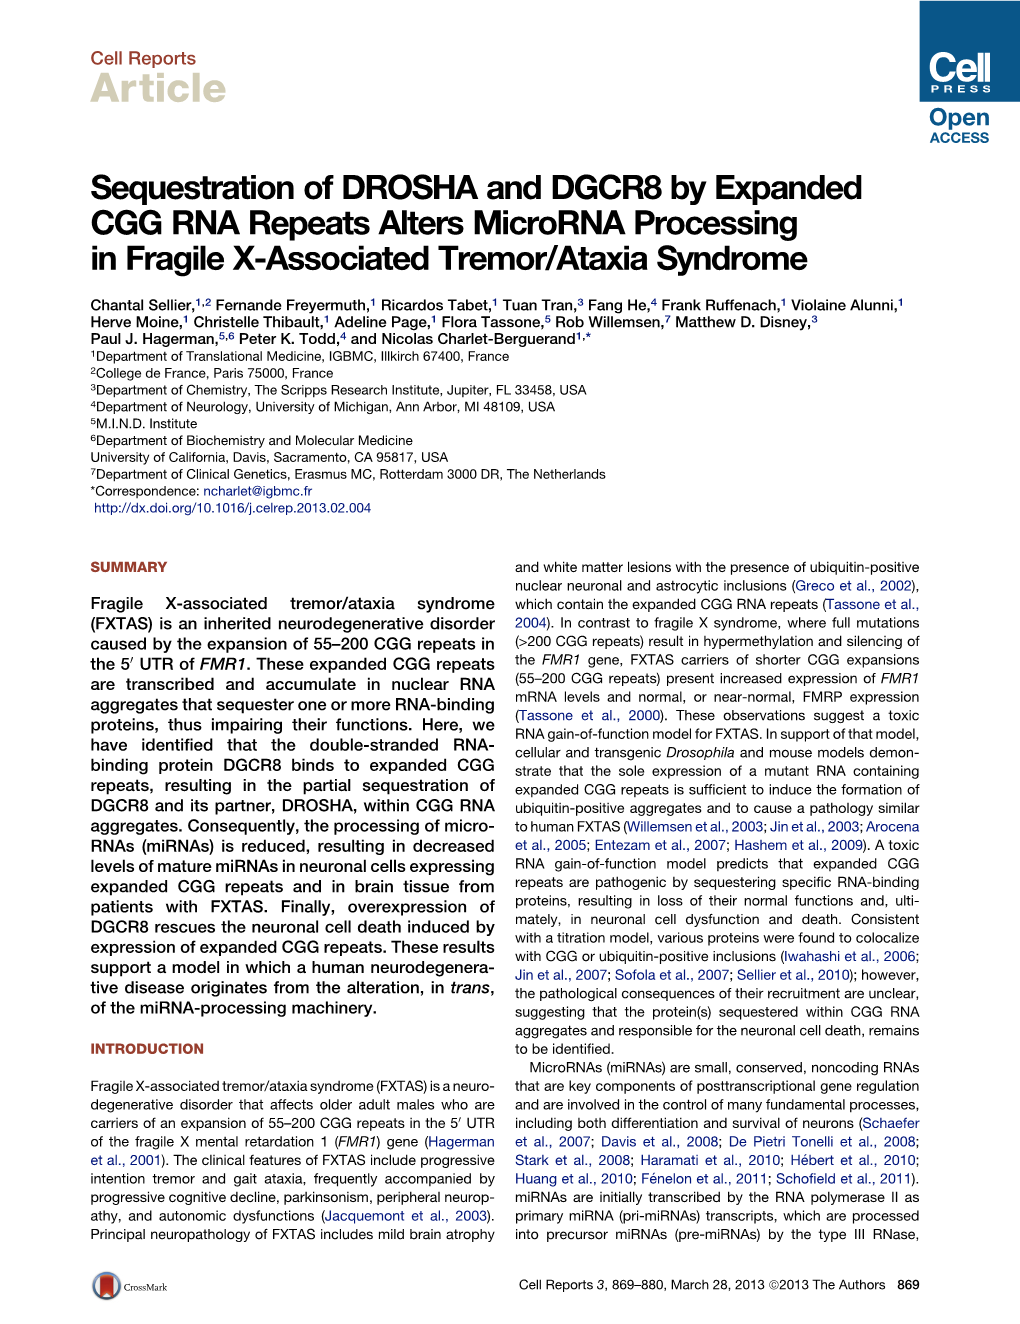 Sequestration of DROSHA and DGCR8 by Expanded CGG RNA Repeats Alters Microrna Processing in Fragile X-Associated Tremor/Ataxia Syndrome